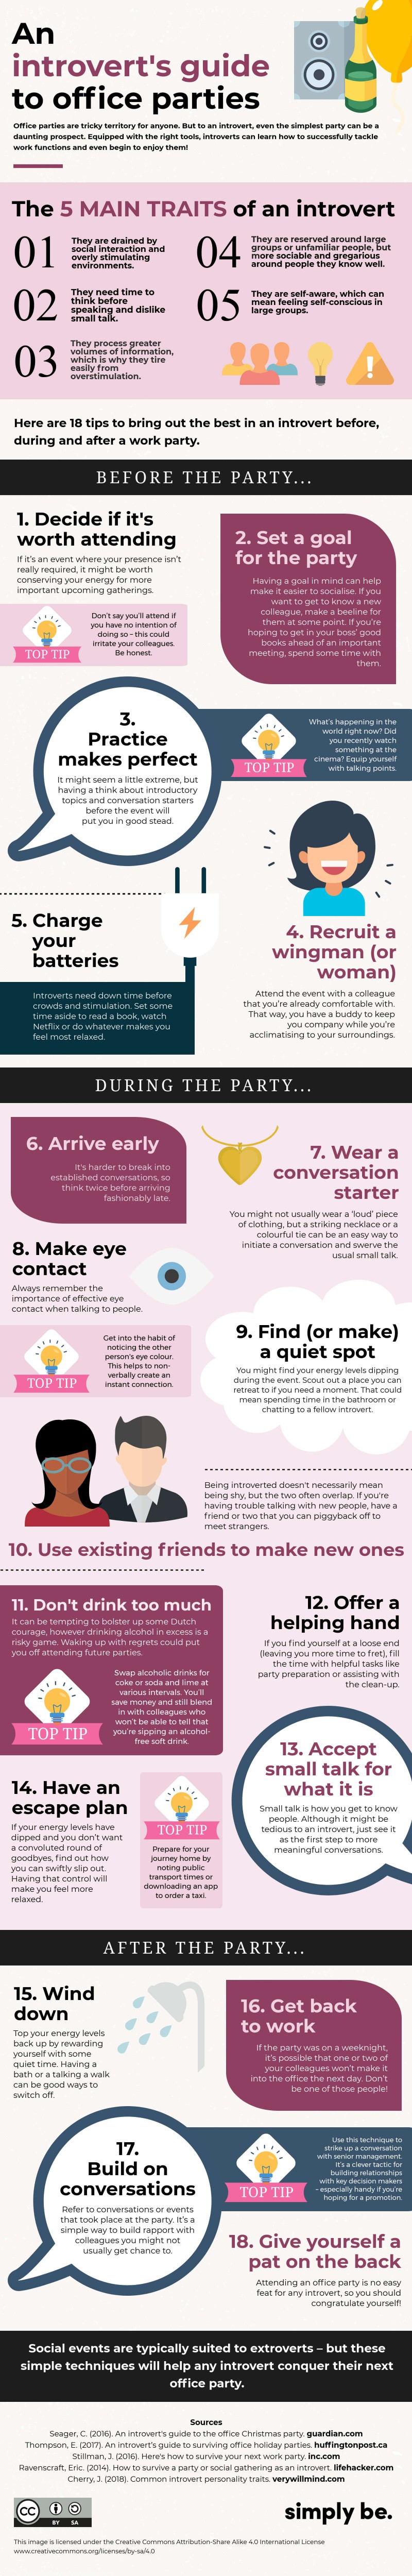 An introvert's guide to office parties_reduced